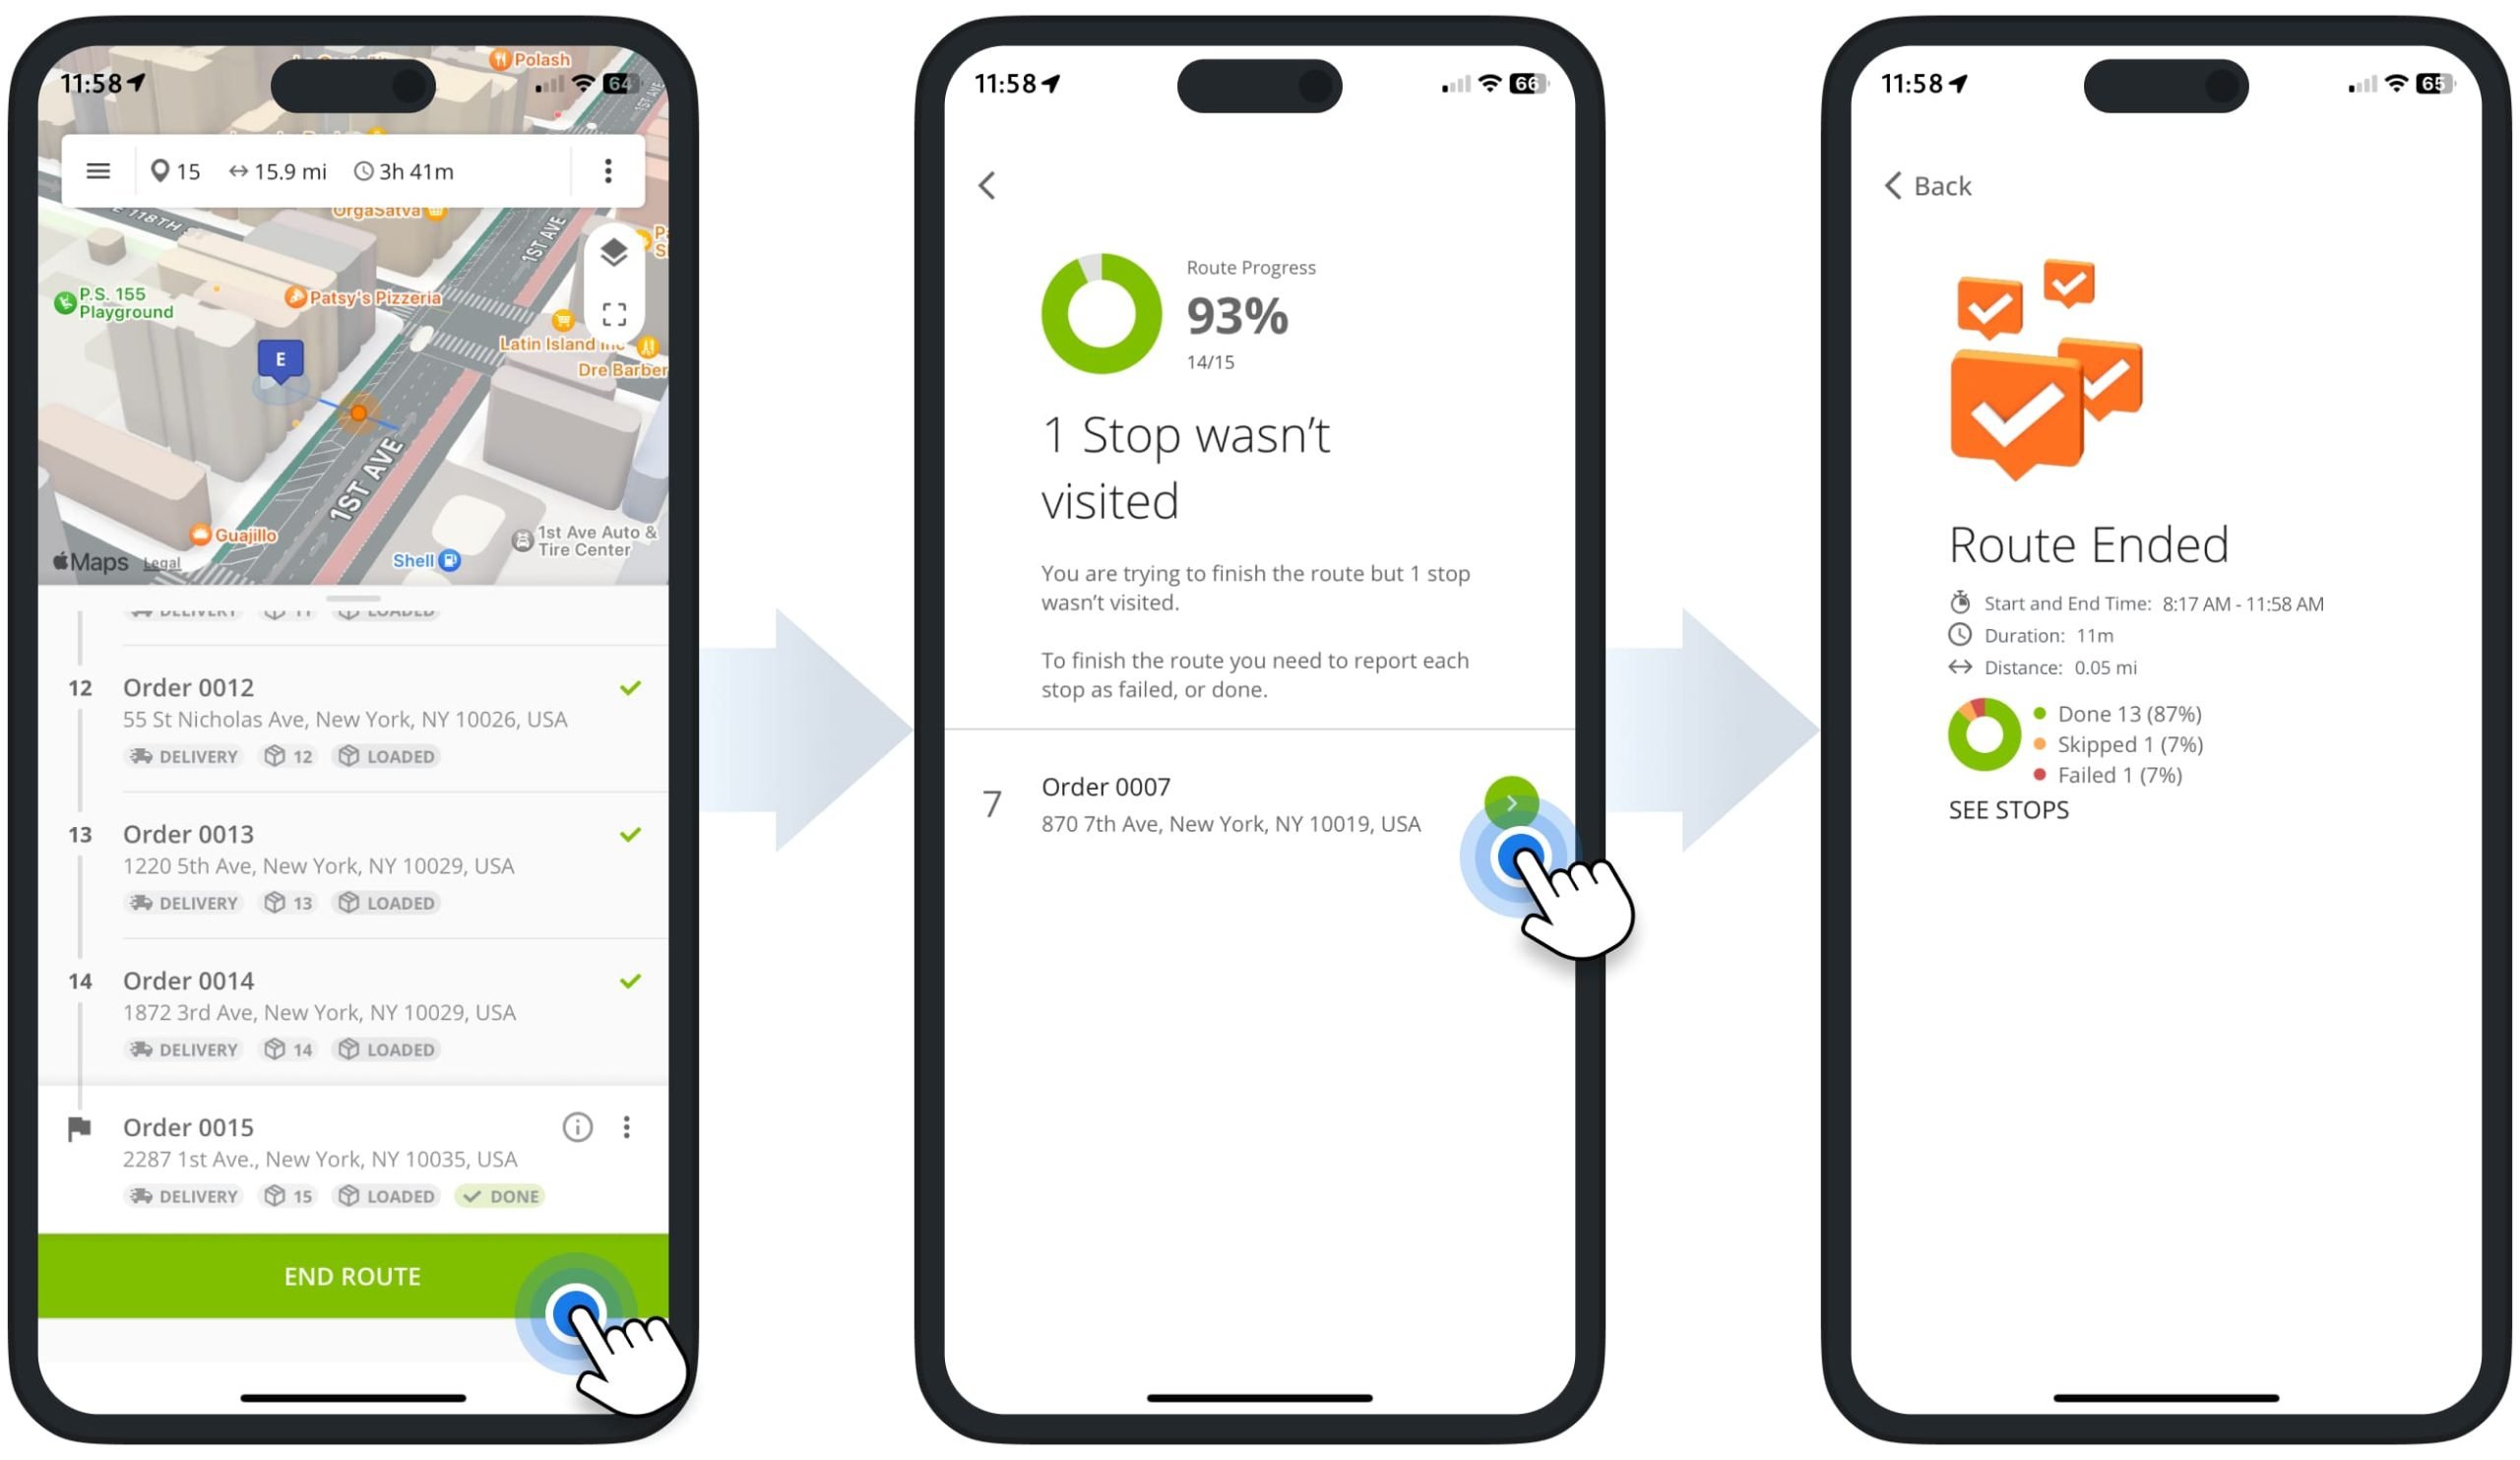 Once a driver starts the route, they can use the app to seamlessly navigate to customer destinations and can visit customers, collect proof of visit, and unload and complete orders.